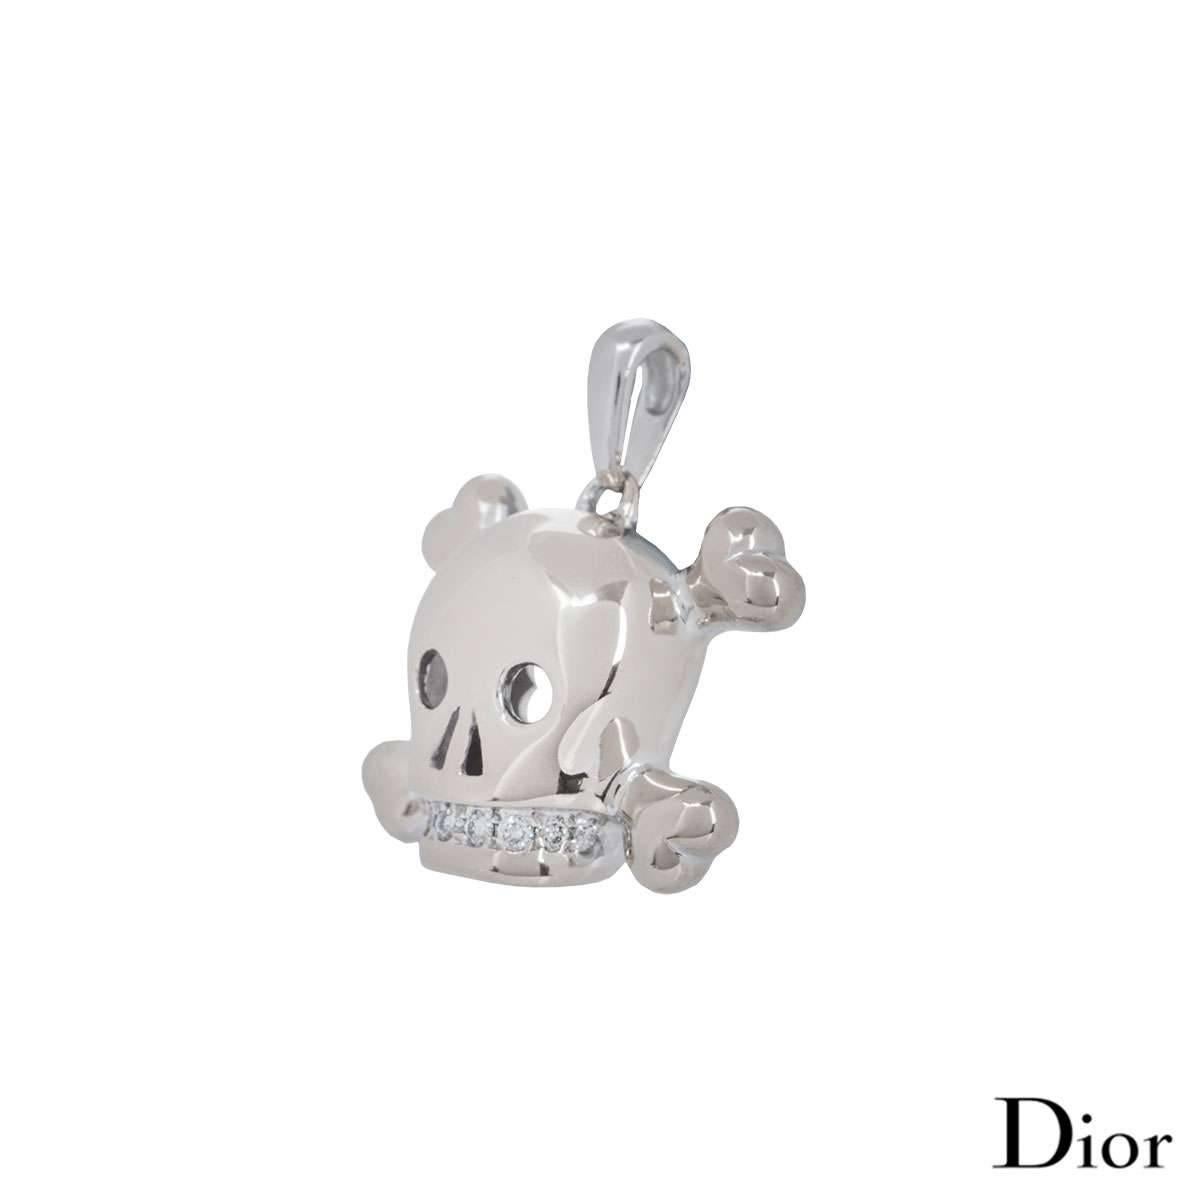 A beautiful 18k white gold skull pendant by Dior, part of the Tete De Mort collection. The pendant has a skull and crossbones design with round brilliant cut diamonds as teeth in a claw setting. There are a total of 8 diamonds weighing 0.16ct,